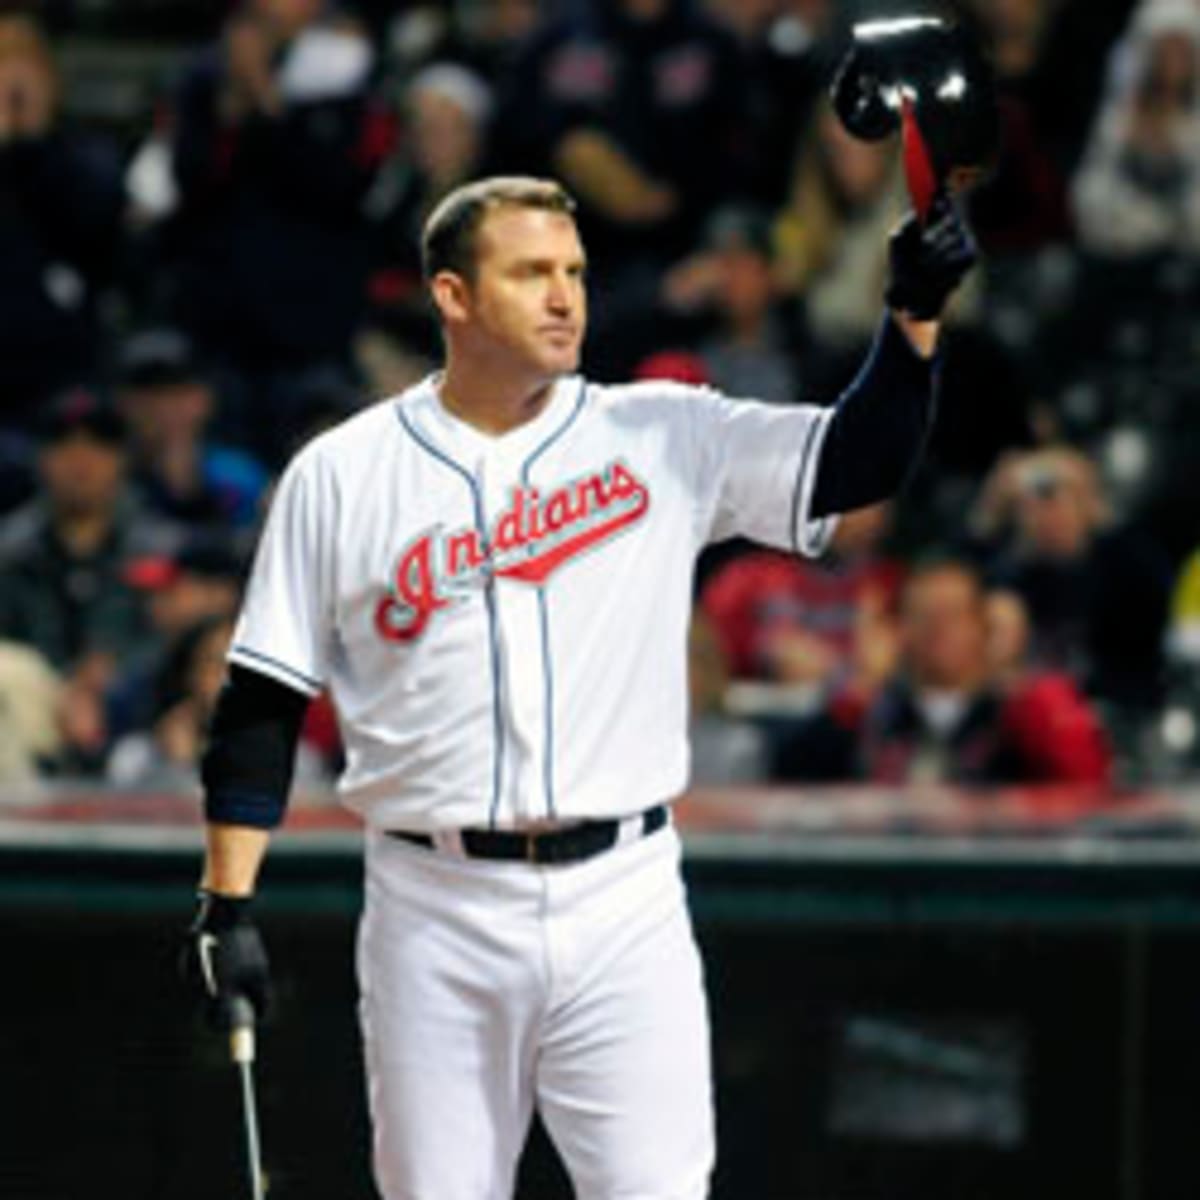 Jim Thome Cleveland Indians Signature Shirt - Bring Your Ideas, Thoughts  And Imaginations Into Reality Today